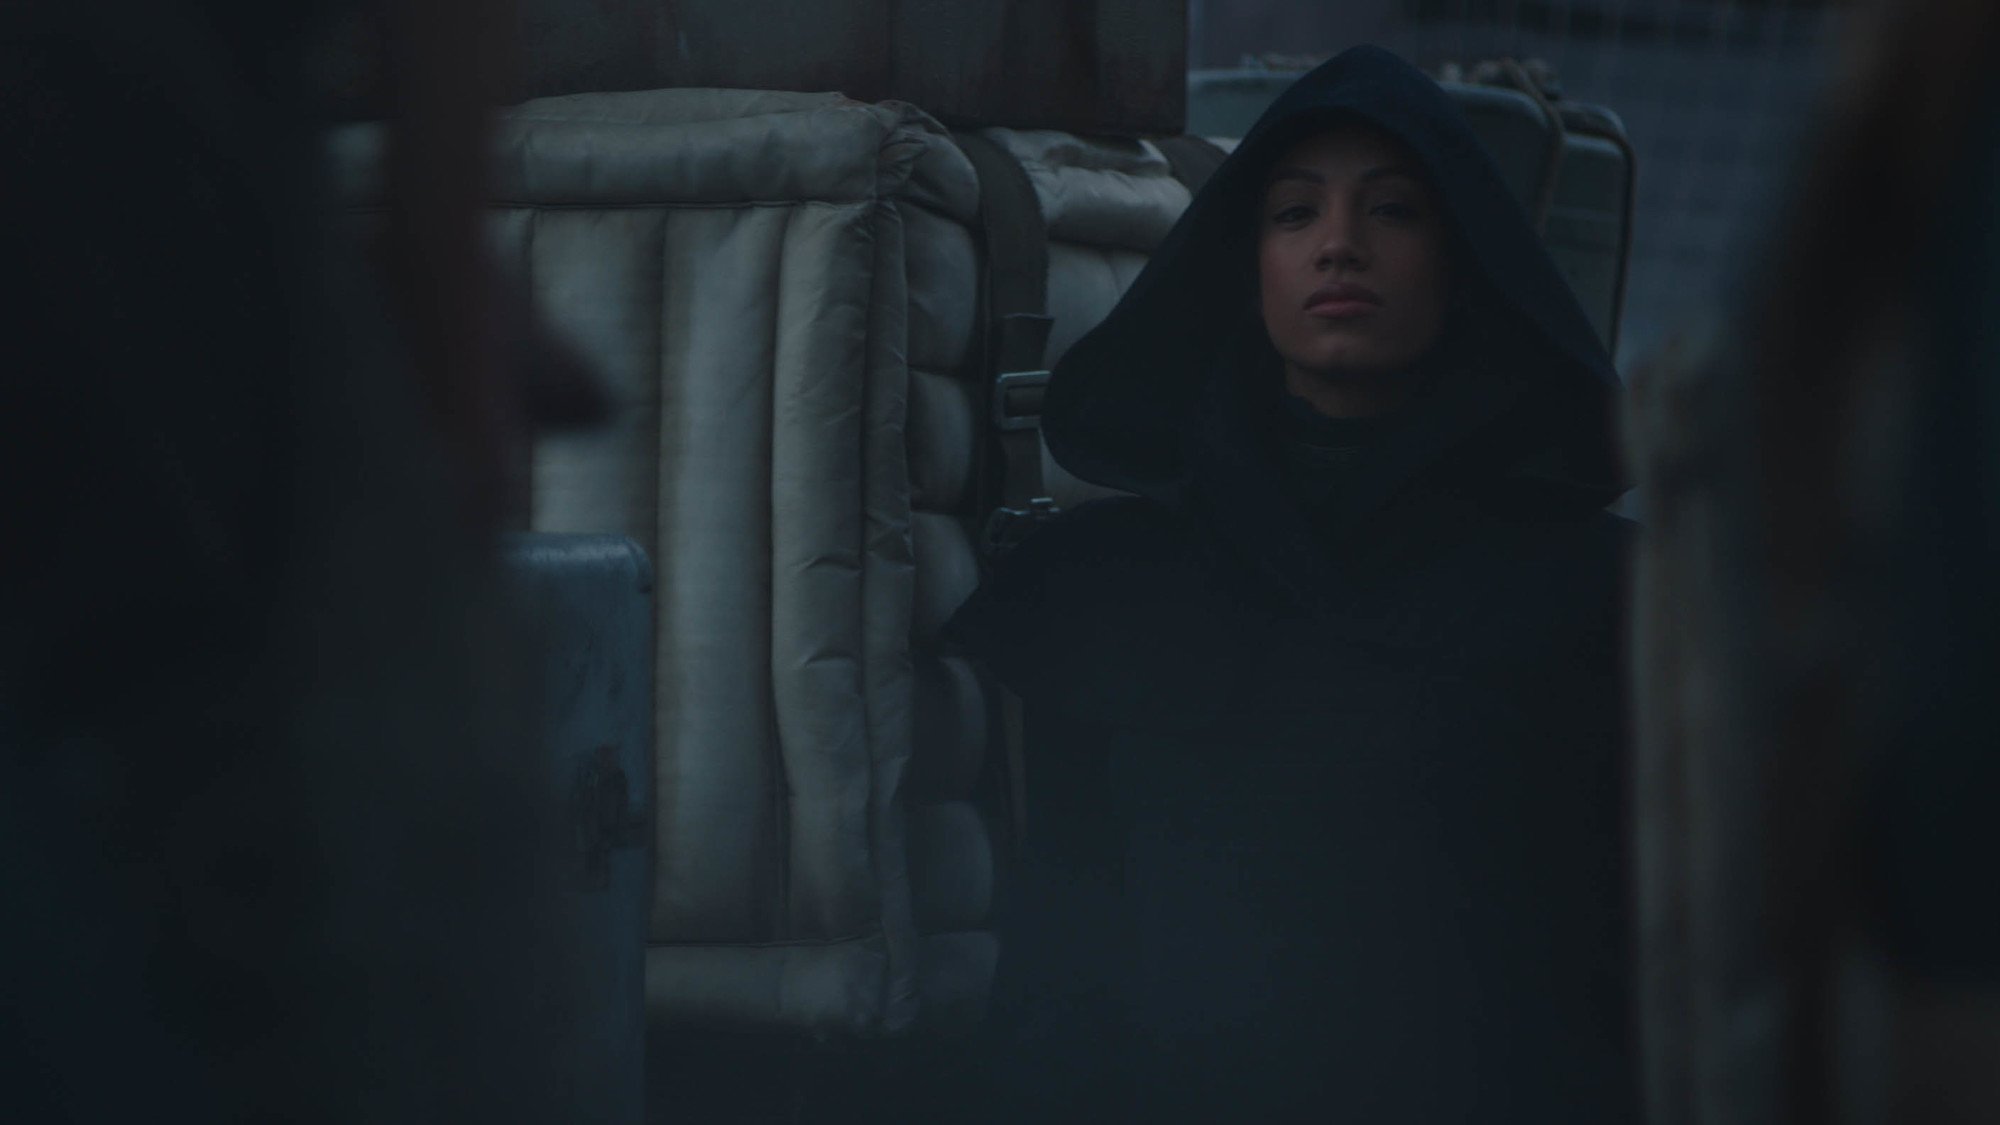 The mysterious hooded character in 'The Mandalorian' Season 2 trailer.